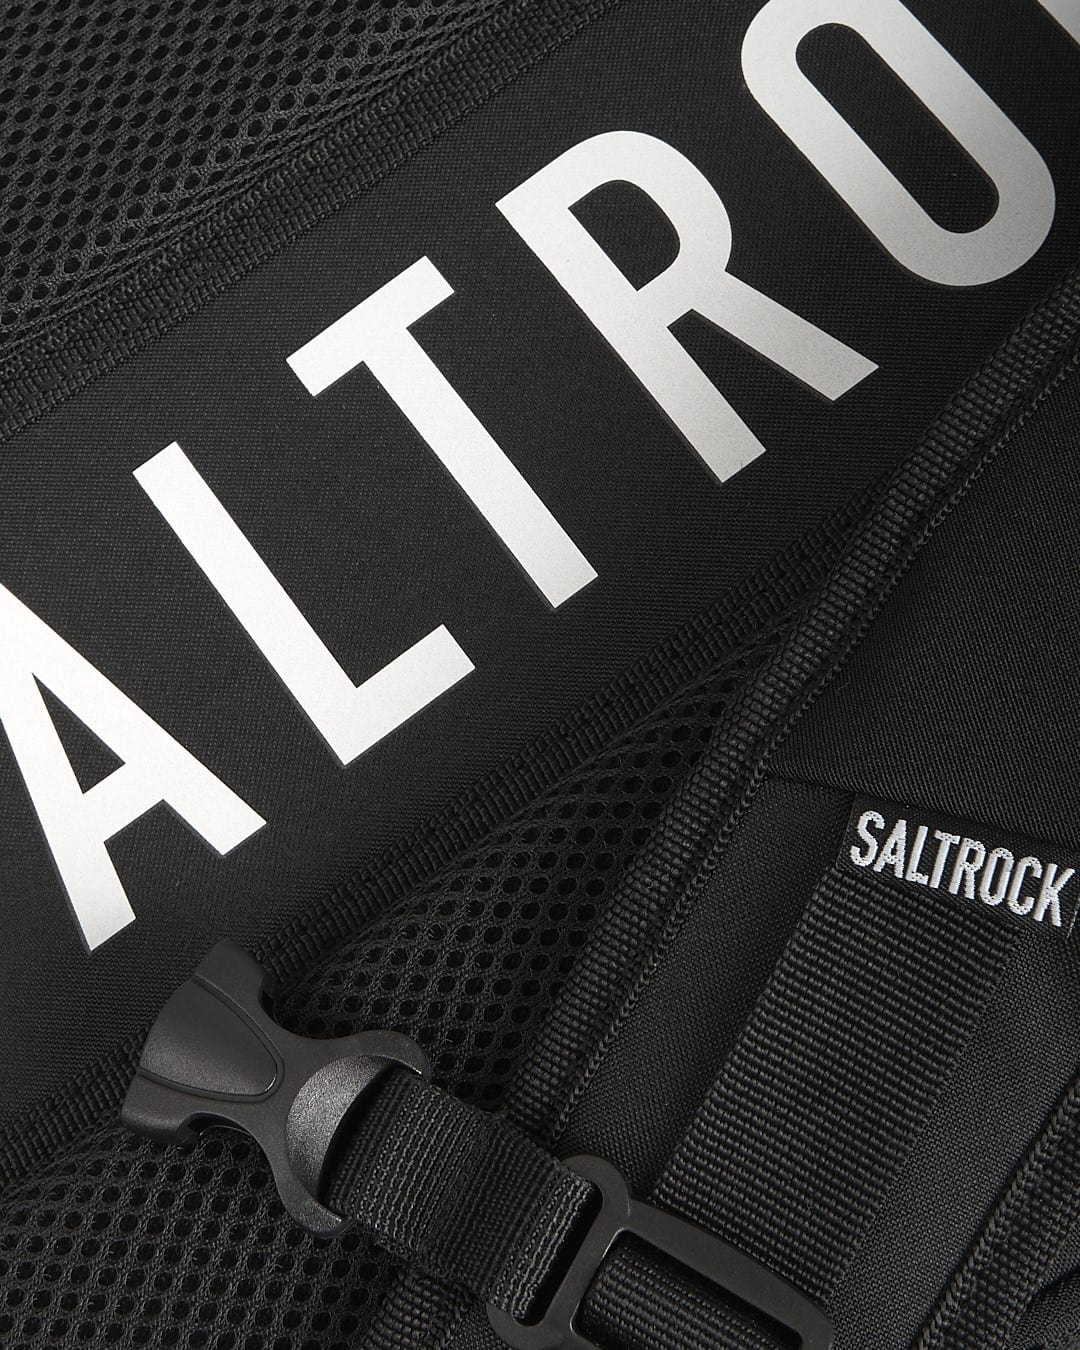 A Streamline - Backpack - Black with the word Saltrock on it.